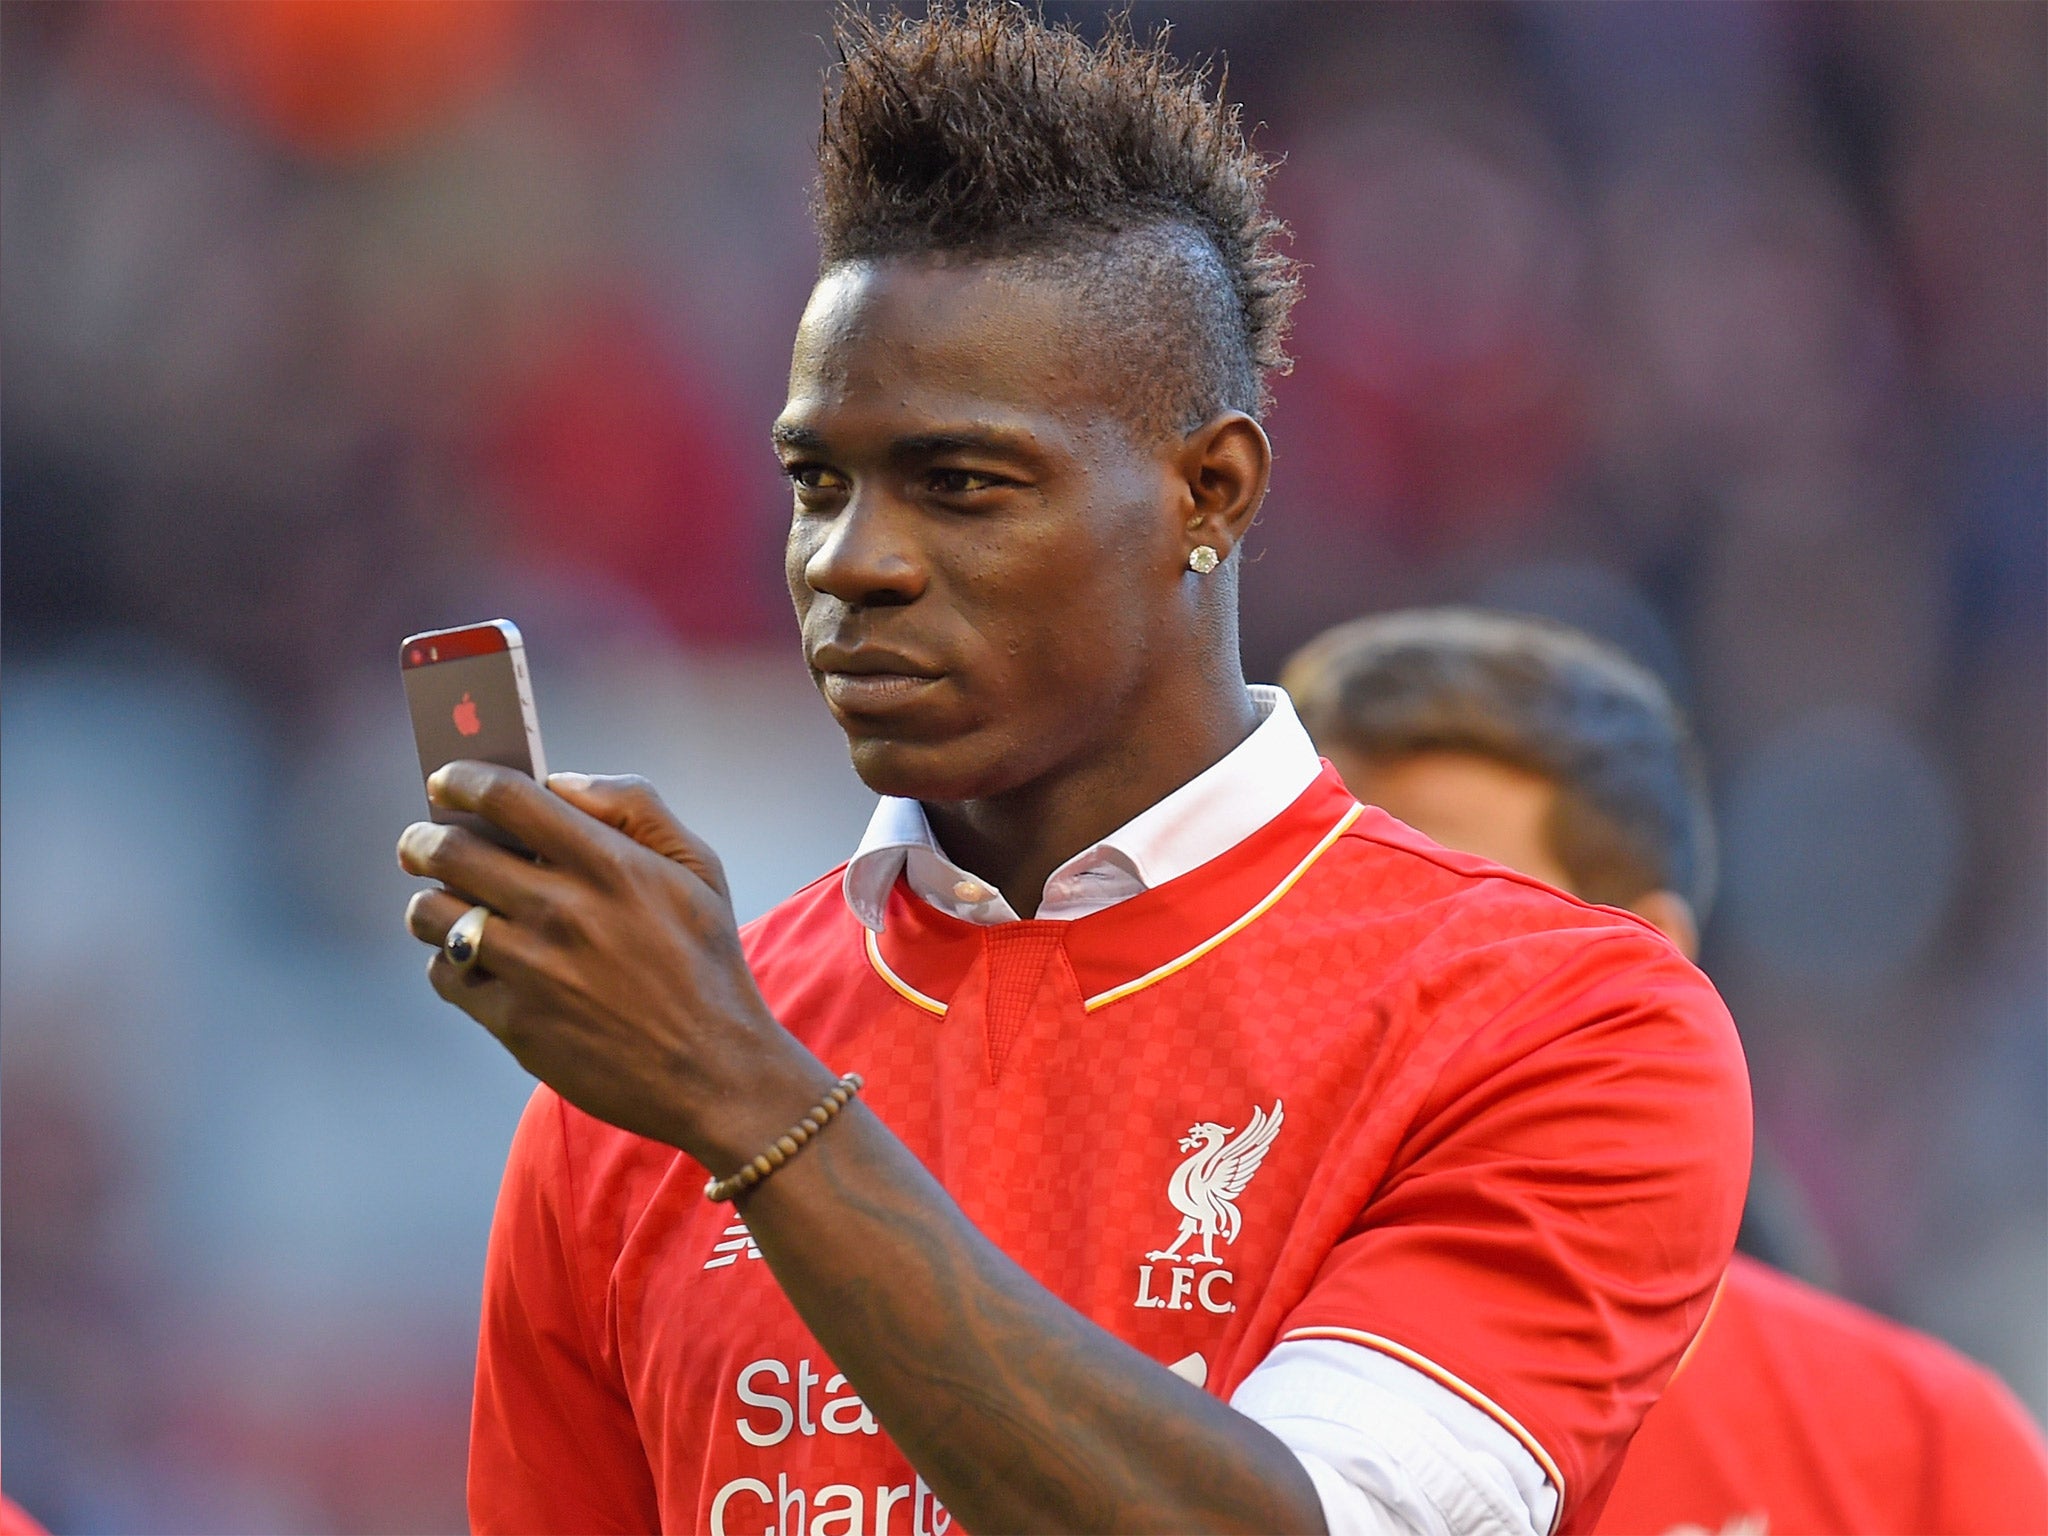 Liverpool striker Mario Balotelli had to apologise for posting an image on social media that contained anti-semitic language last season